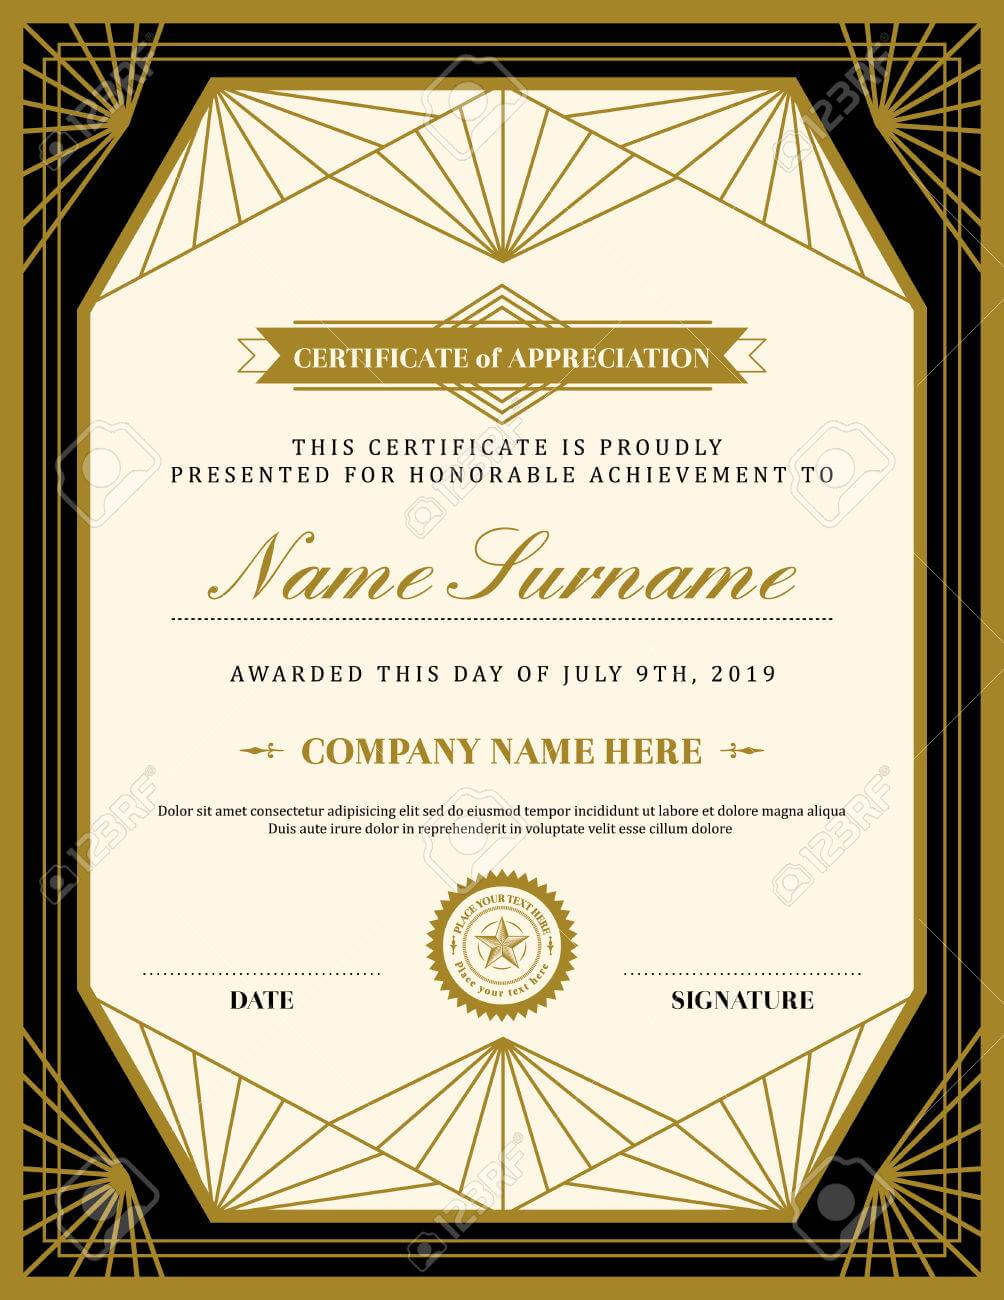 Vintage Retro Art Deco Frame Certificate Background Design Template Intended For Free Art Certificate Templates